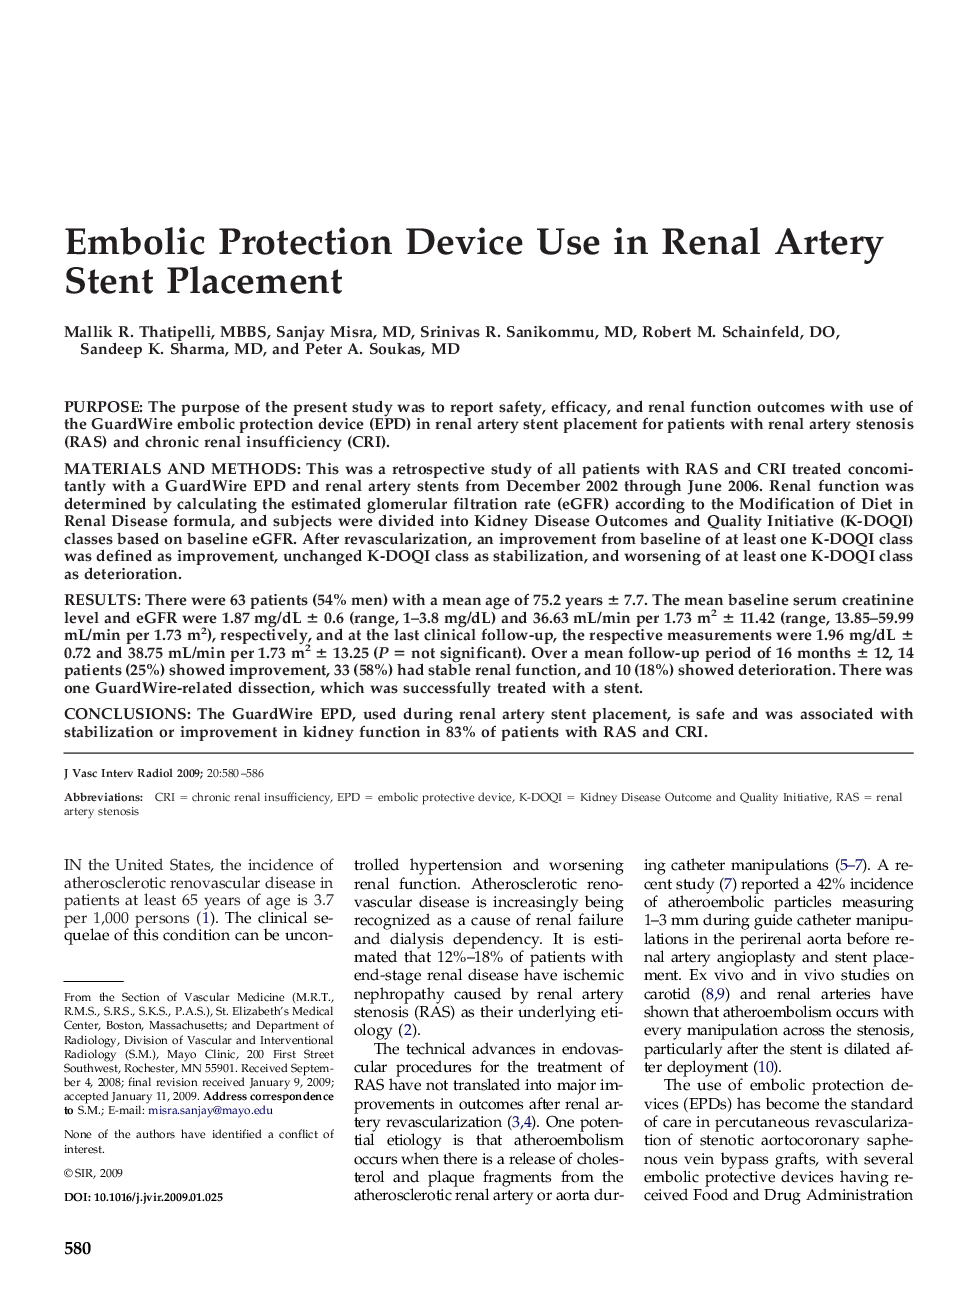 Embolic Protection Device Use in Renal Artery Stent Placement